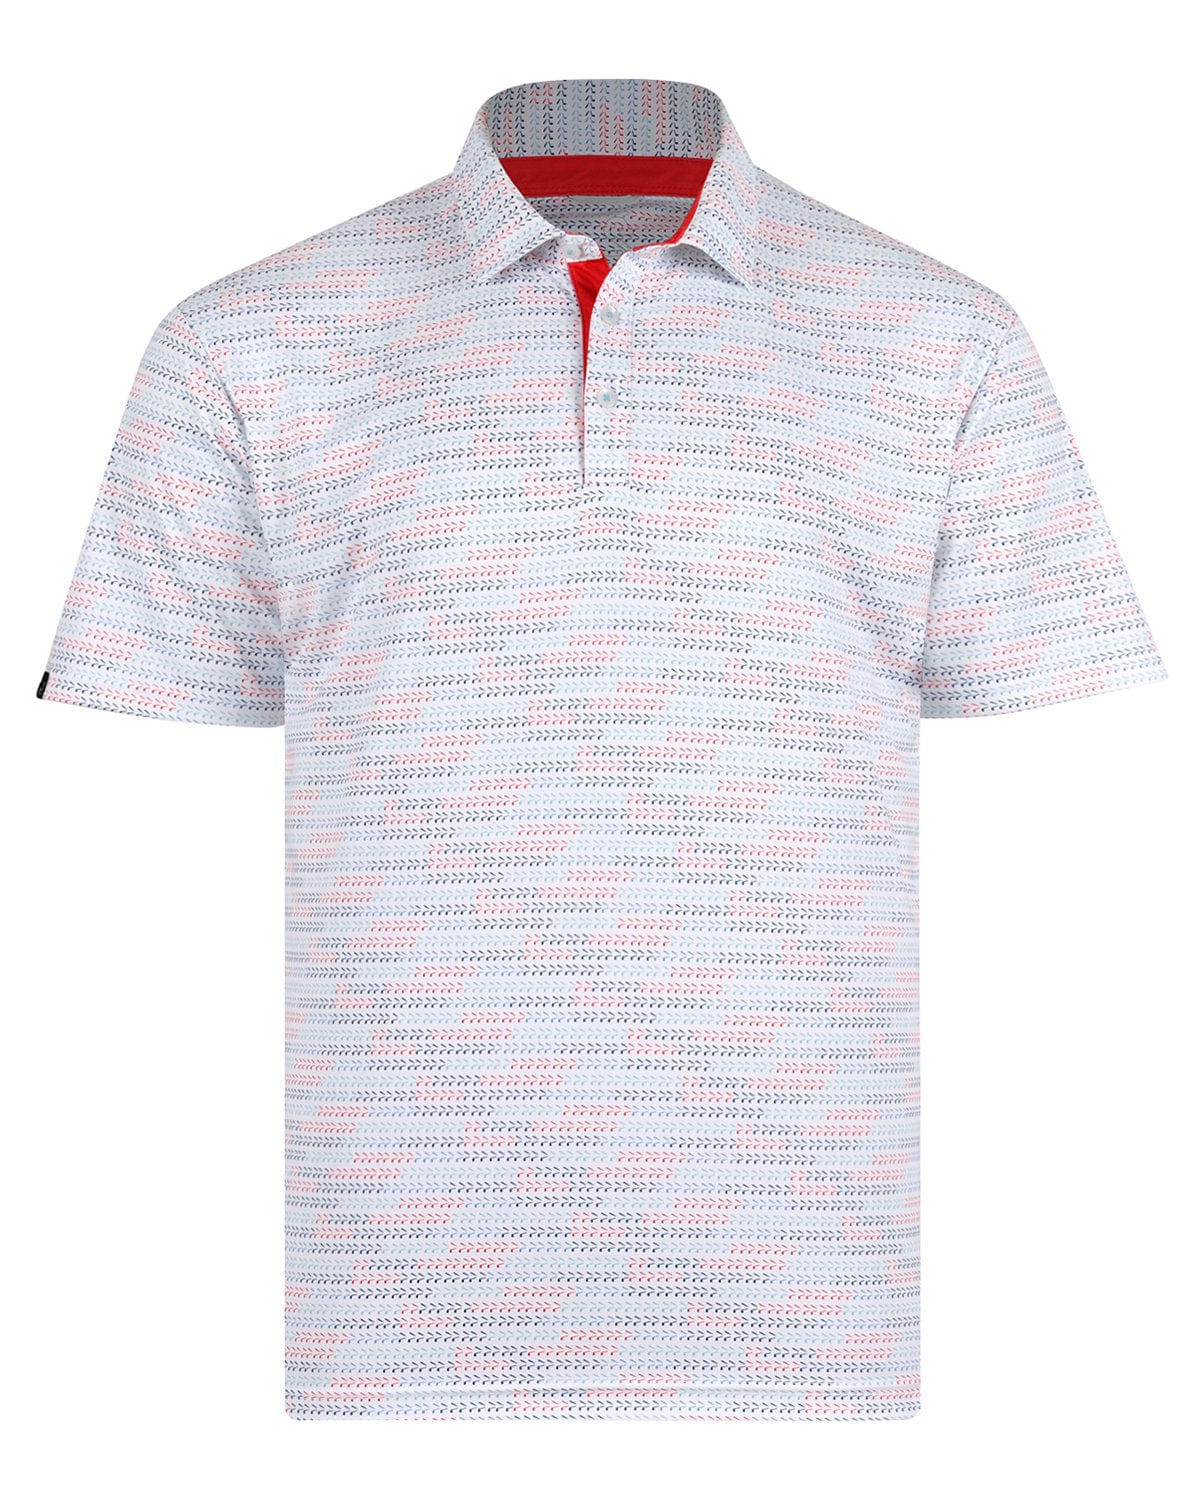 Swannies Golf Polos S / Red Multi Swannies Golf - Men's Carlson Polo